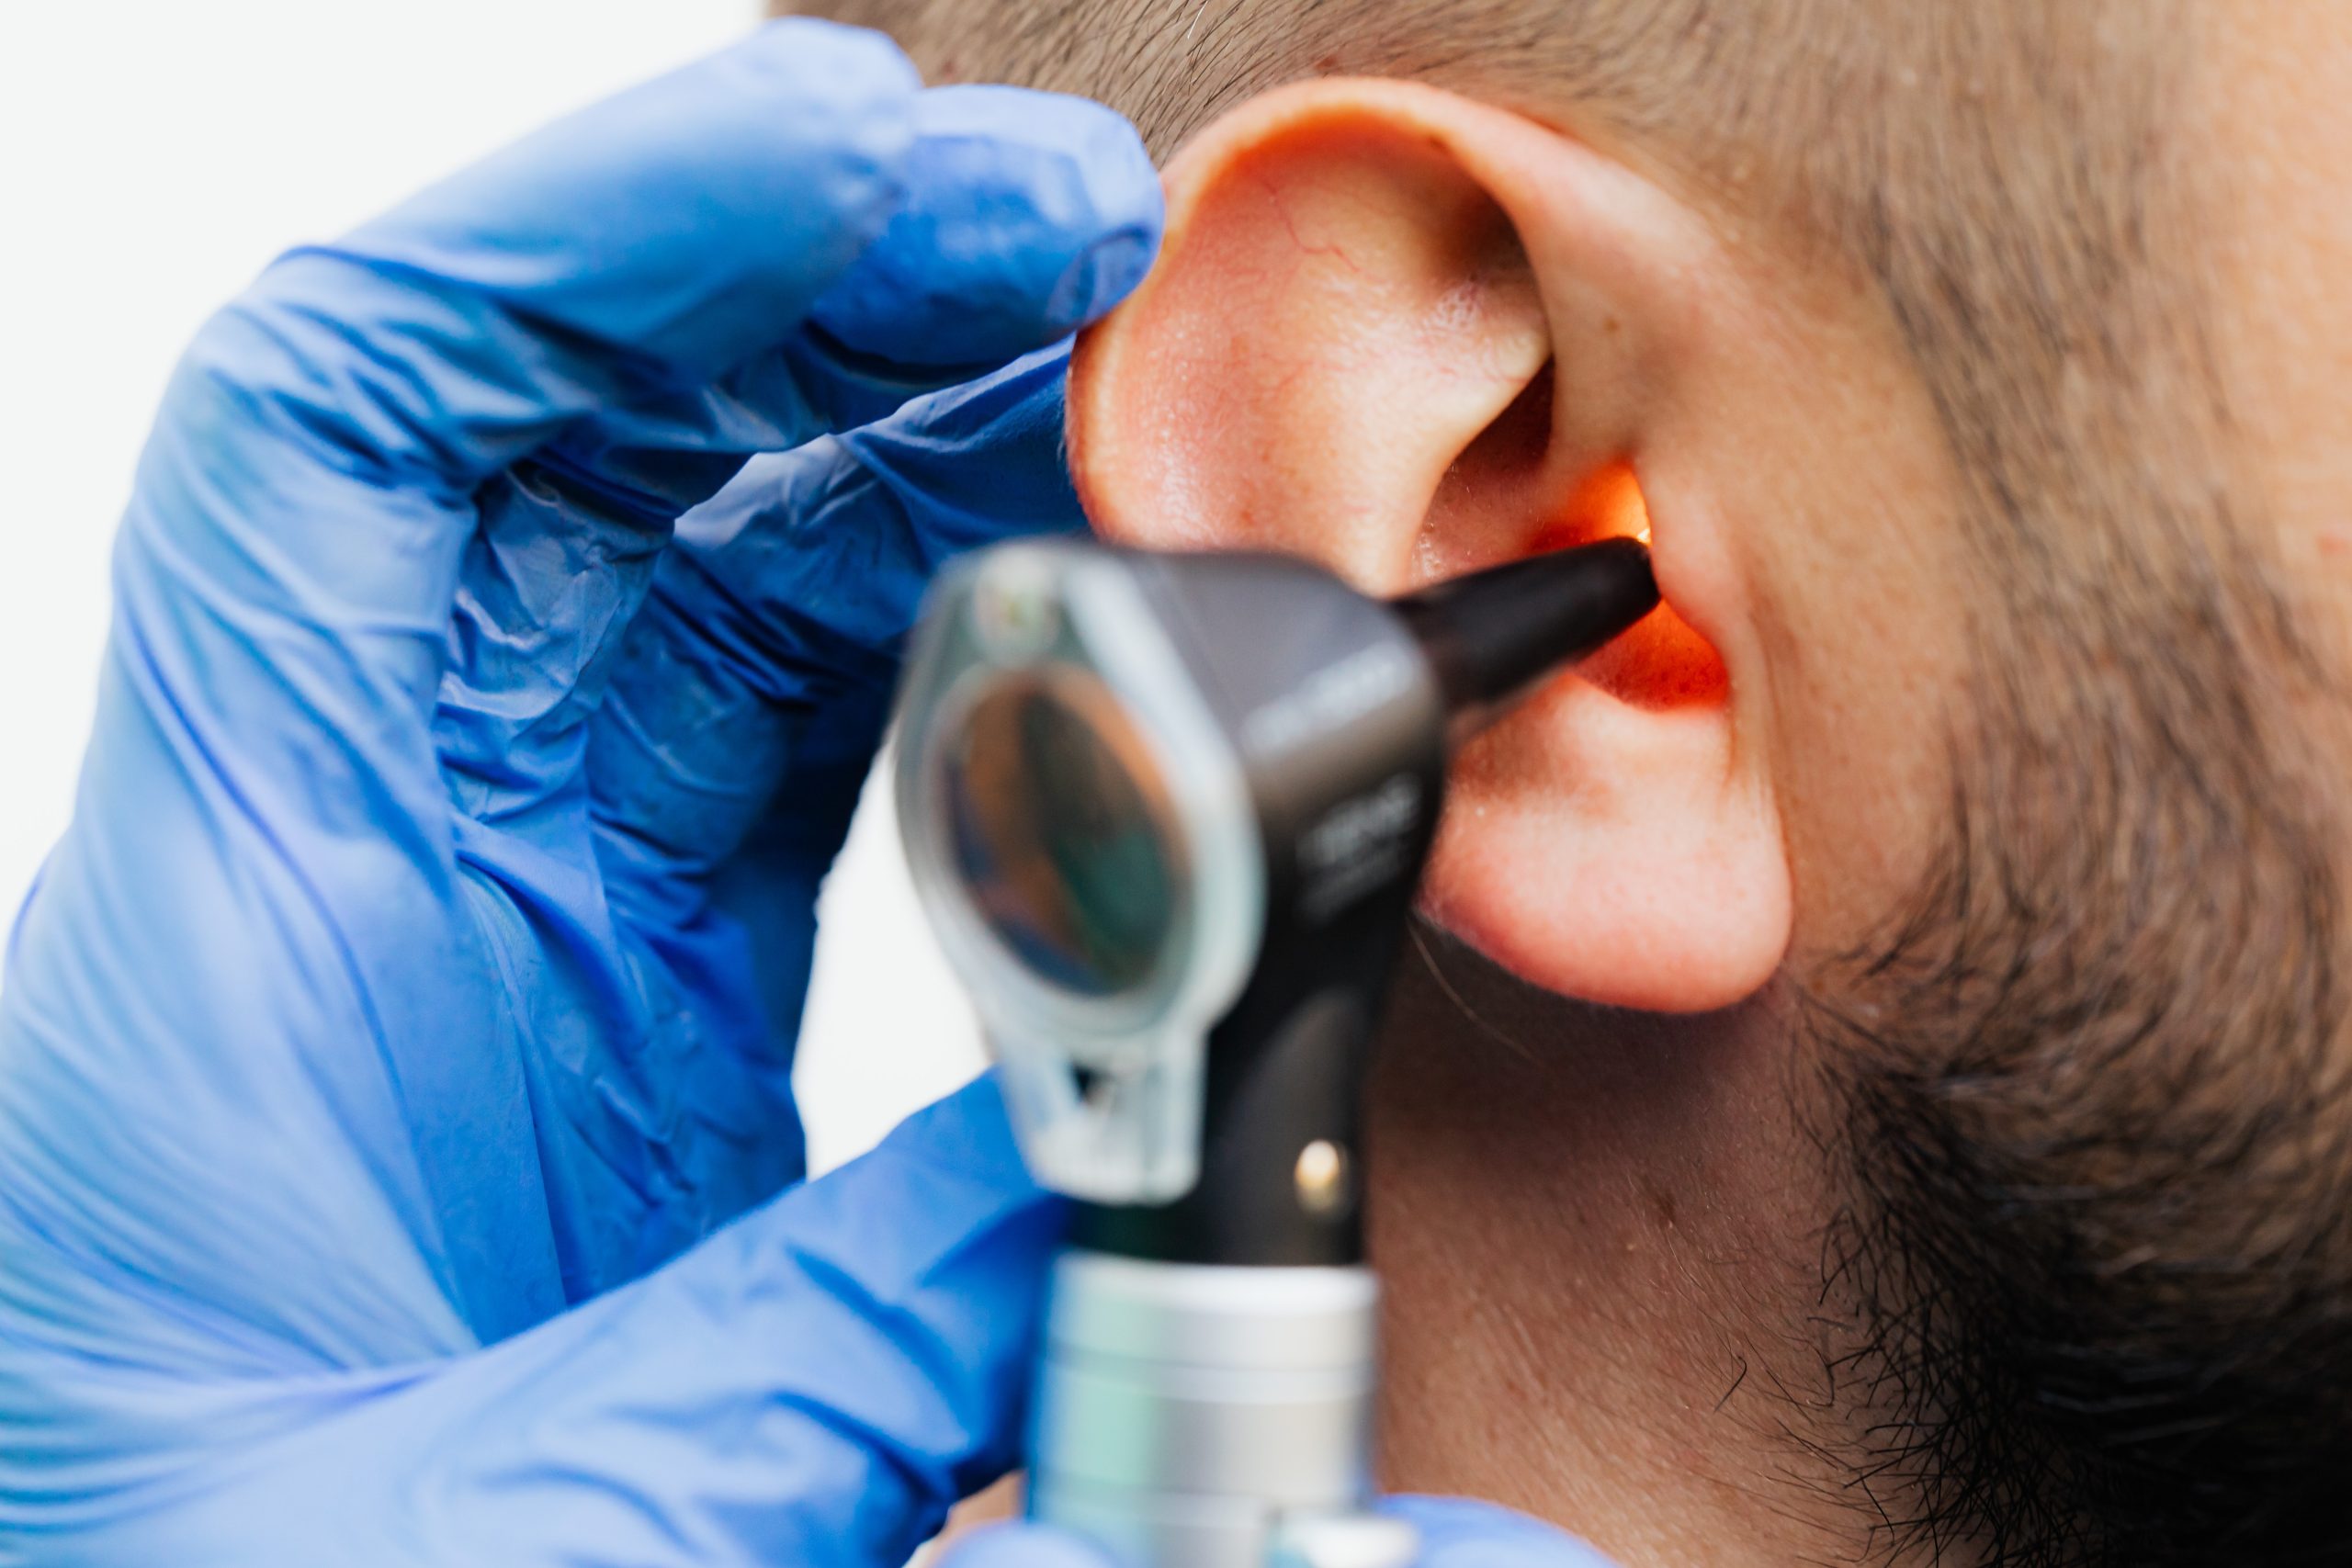 An otoscope is a medical device used to look into the ear canal and  eardrum. It consists of a handle and a head containing a light source and a  simple low-power magnifying